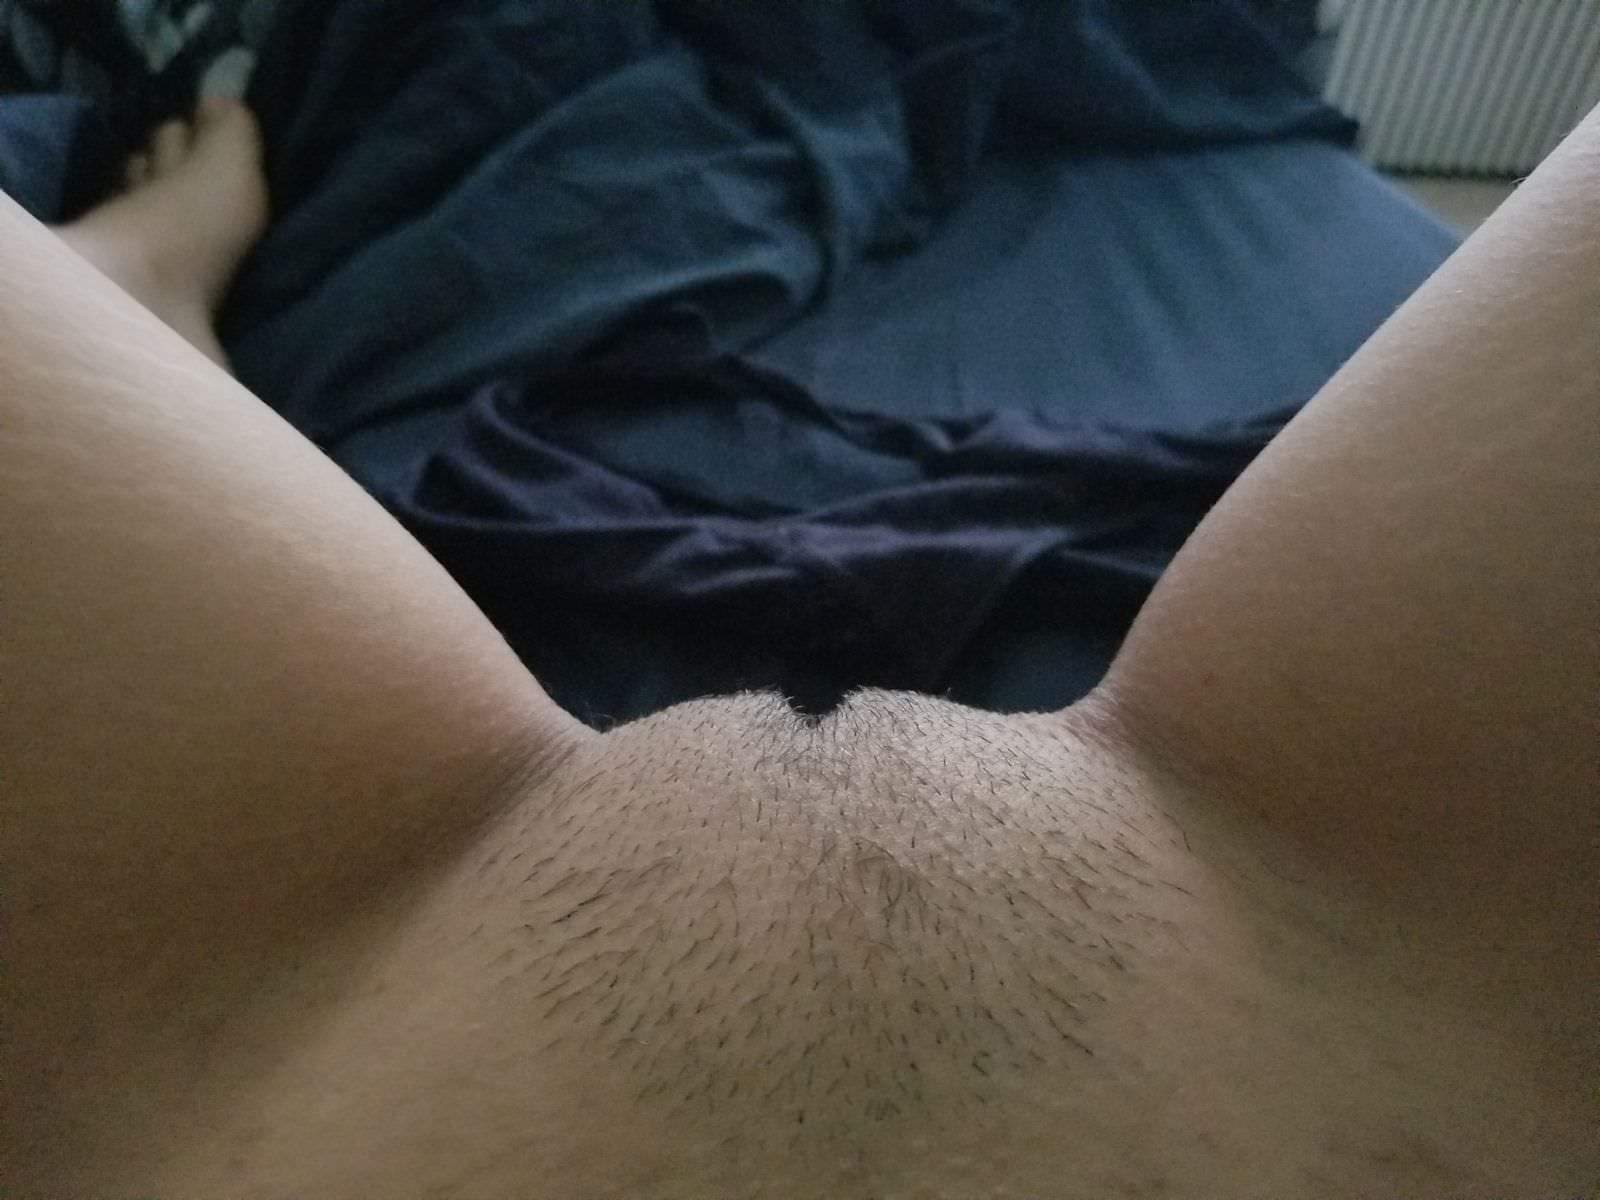 My wife just trimmed her pussy image